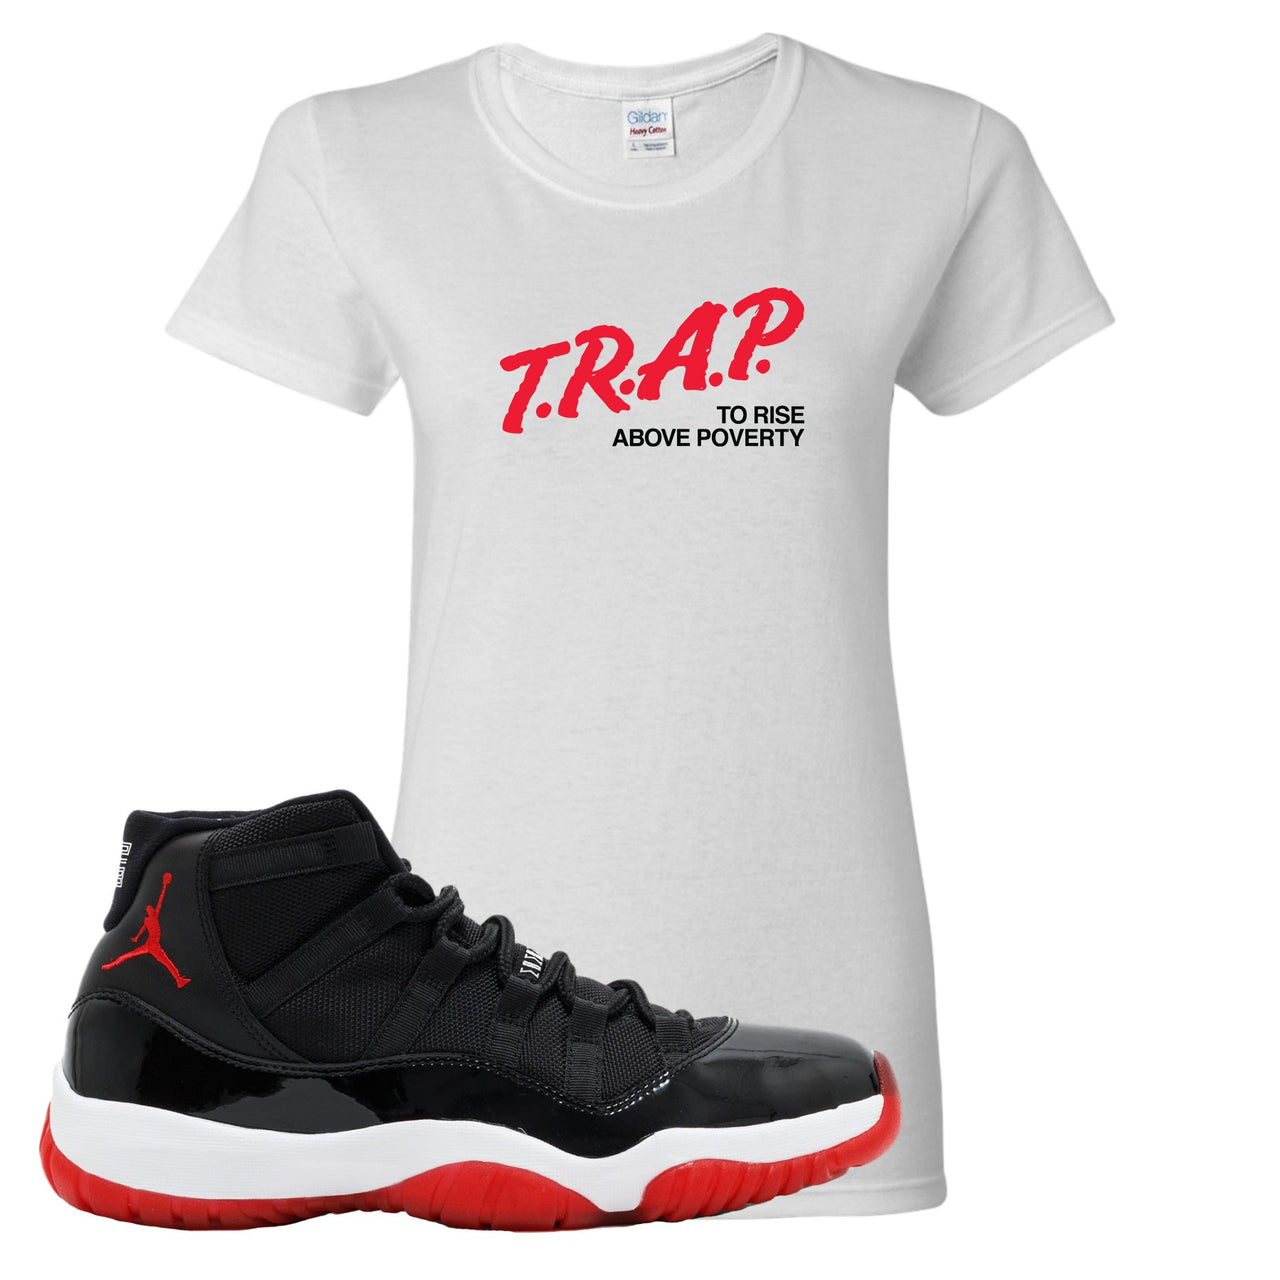 Jordan 11 Bred Trap To Rise Above Poverty White Sneaker Hook Up Women's T-Shirt